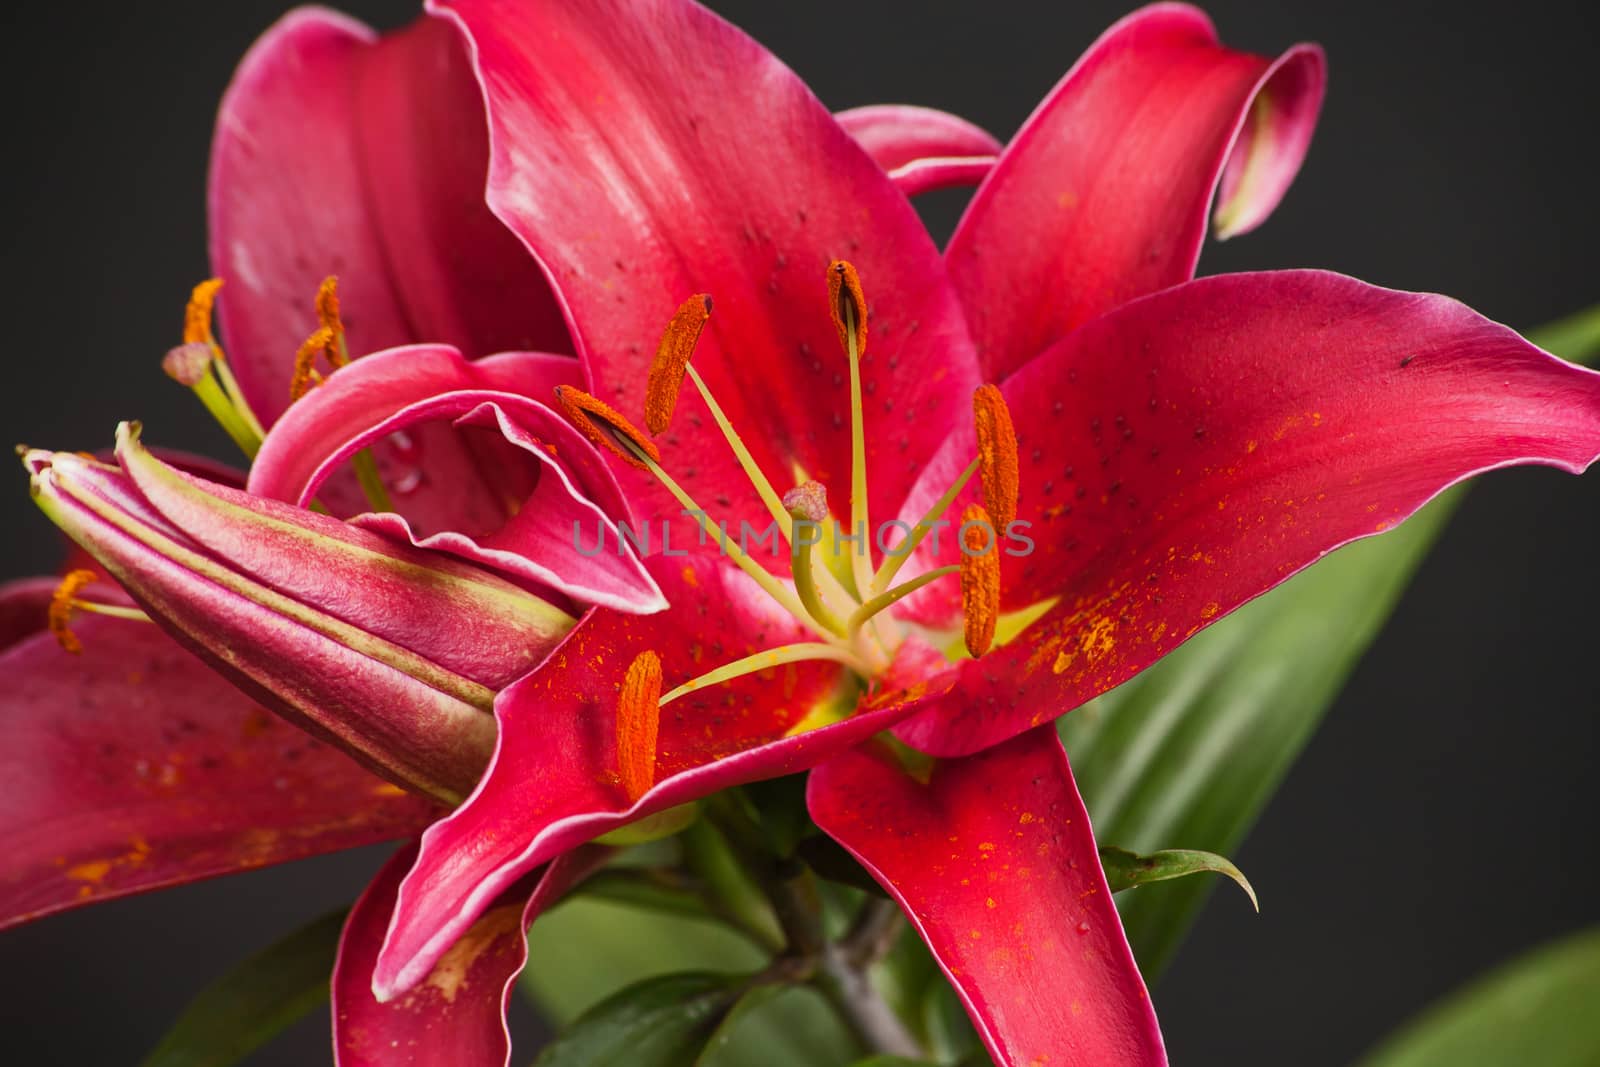 Red Oriental Lily 4 by kobus_peche